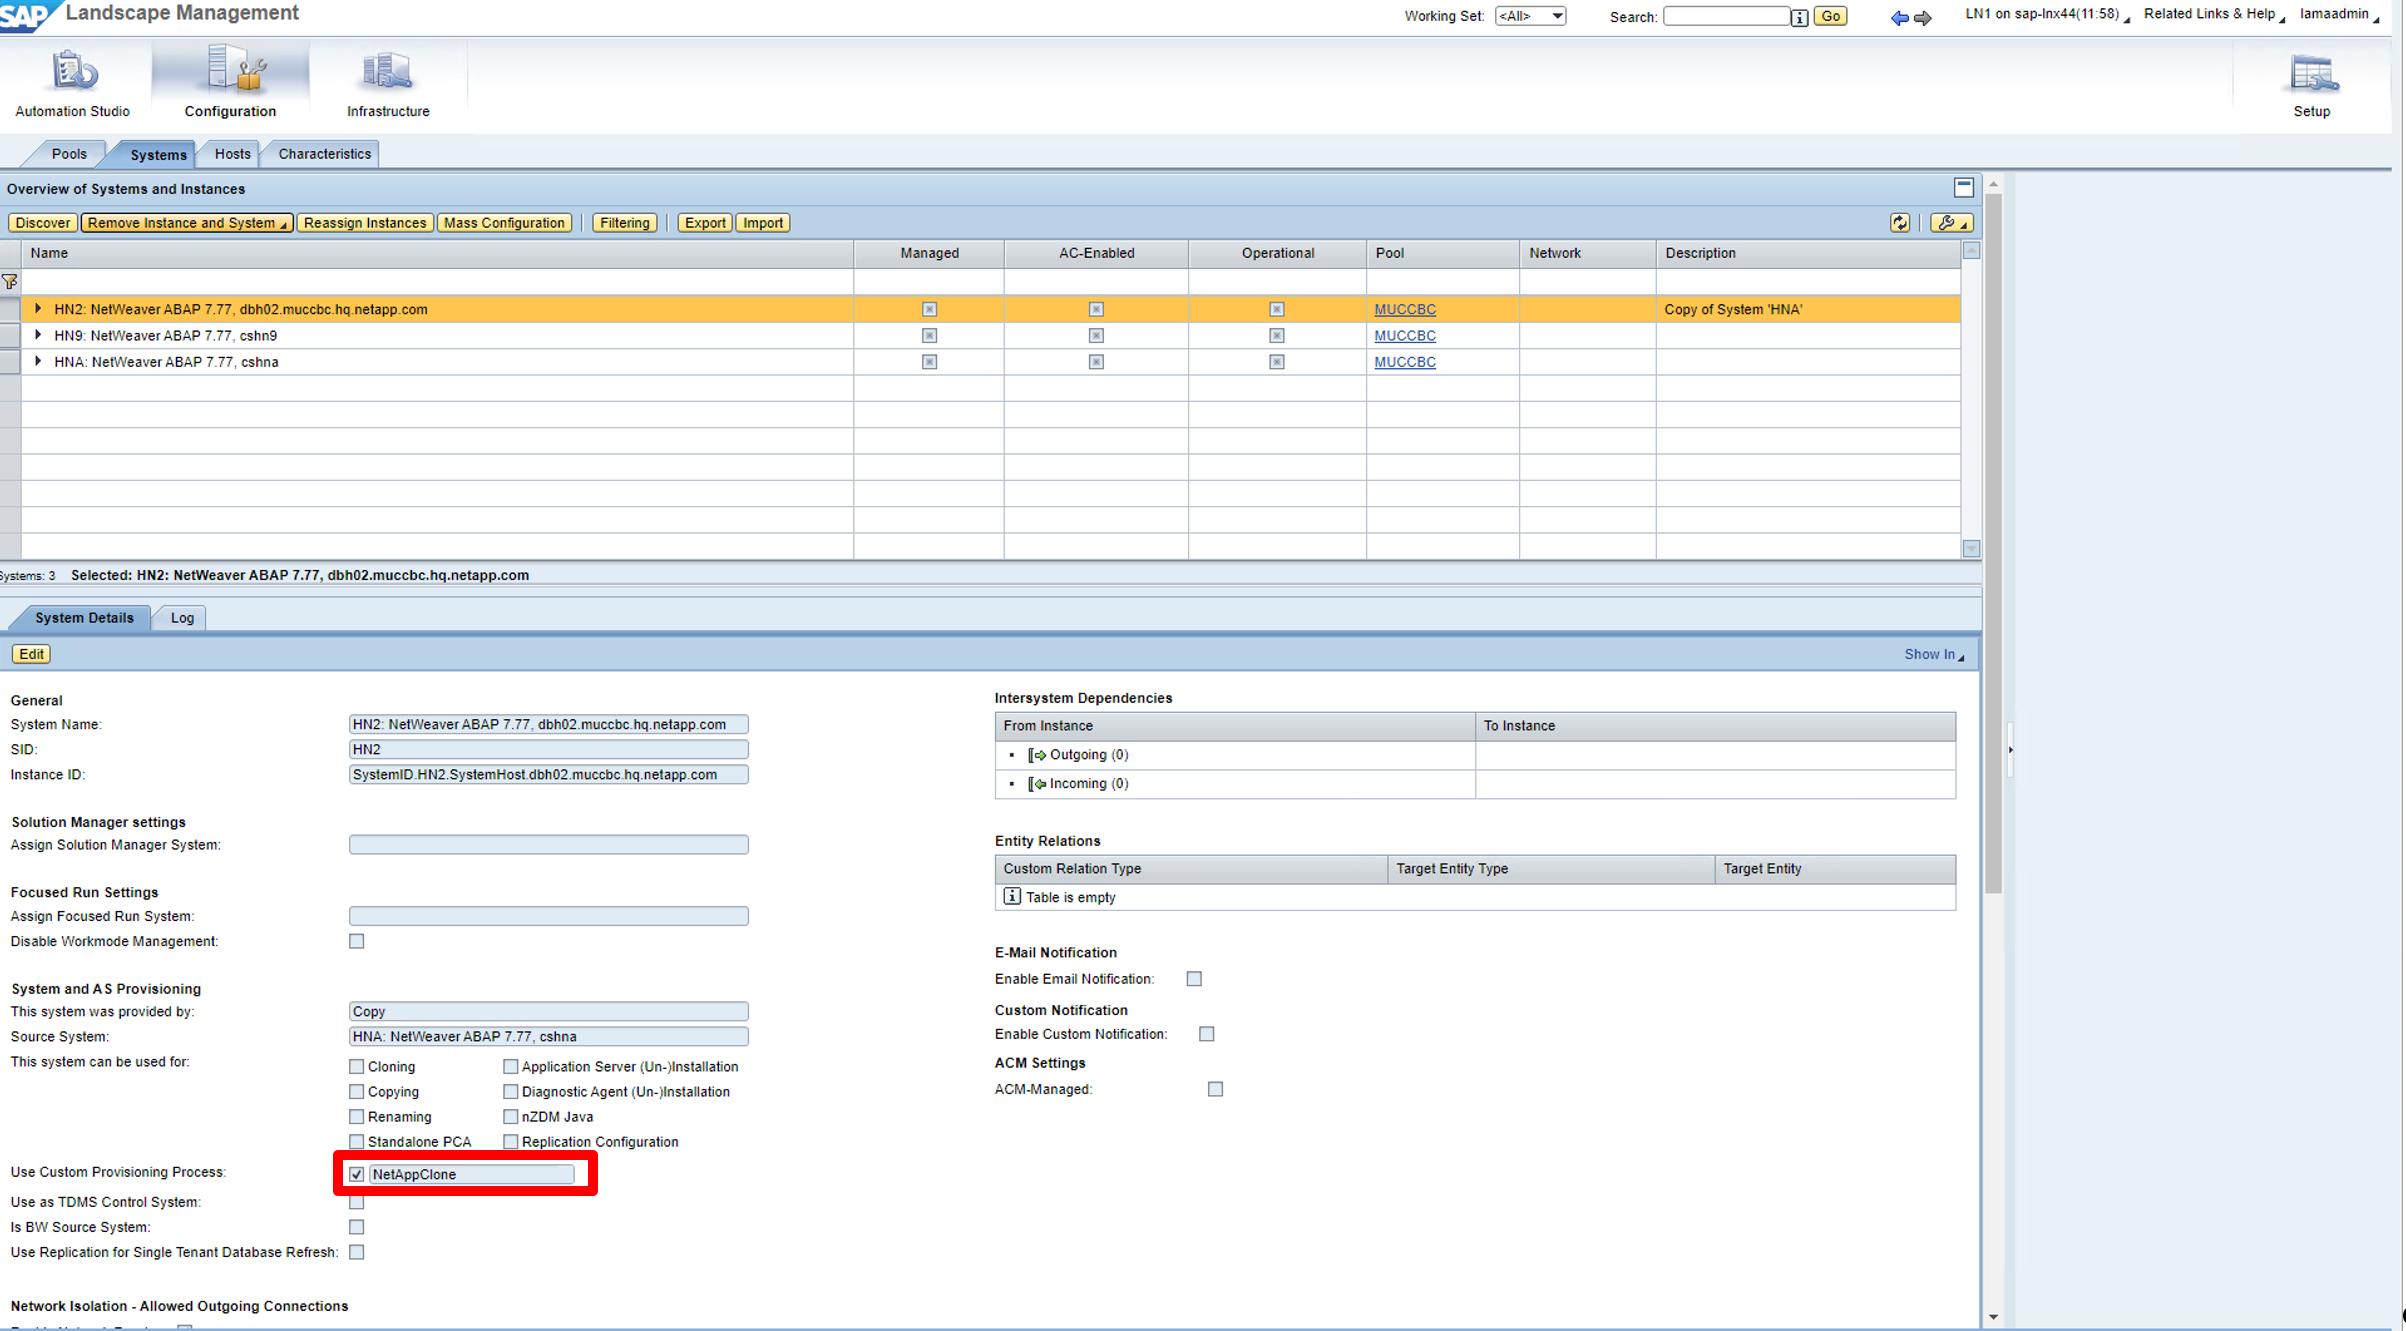 This screenshot shows the LaMa Systems screen along with systems details, and the Use Custom Processing Process checkbox is checked.